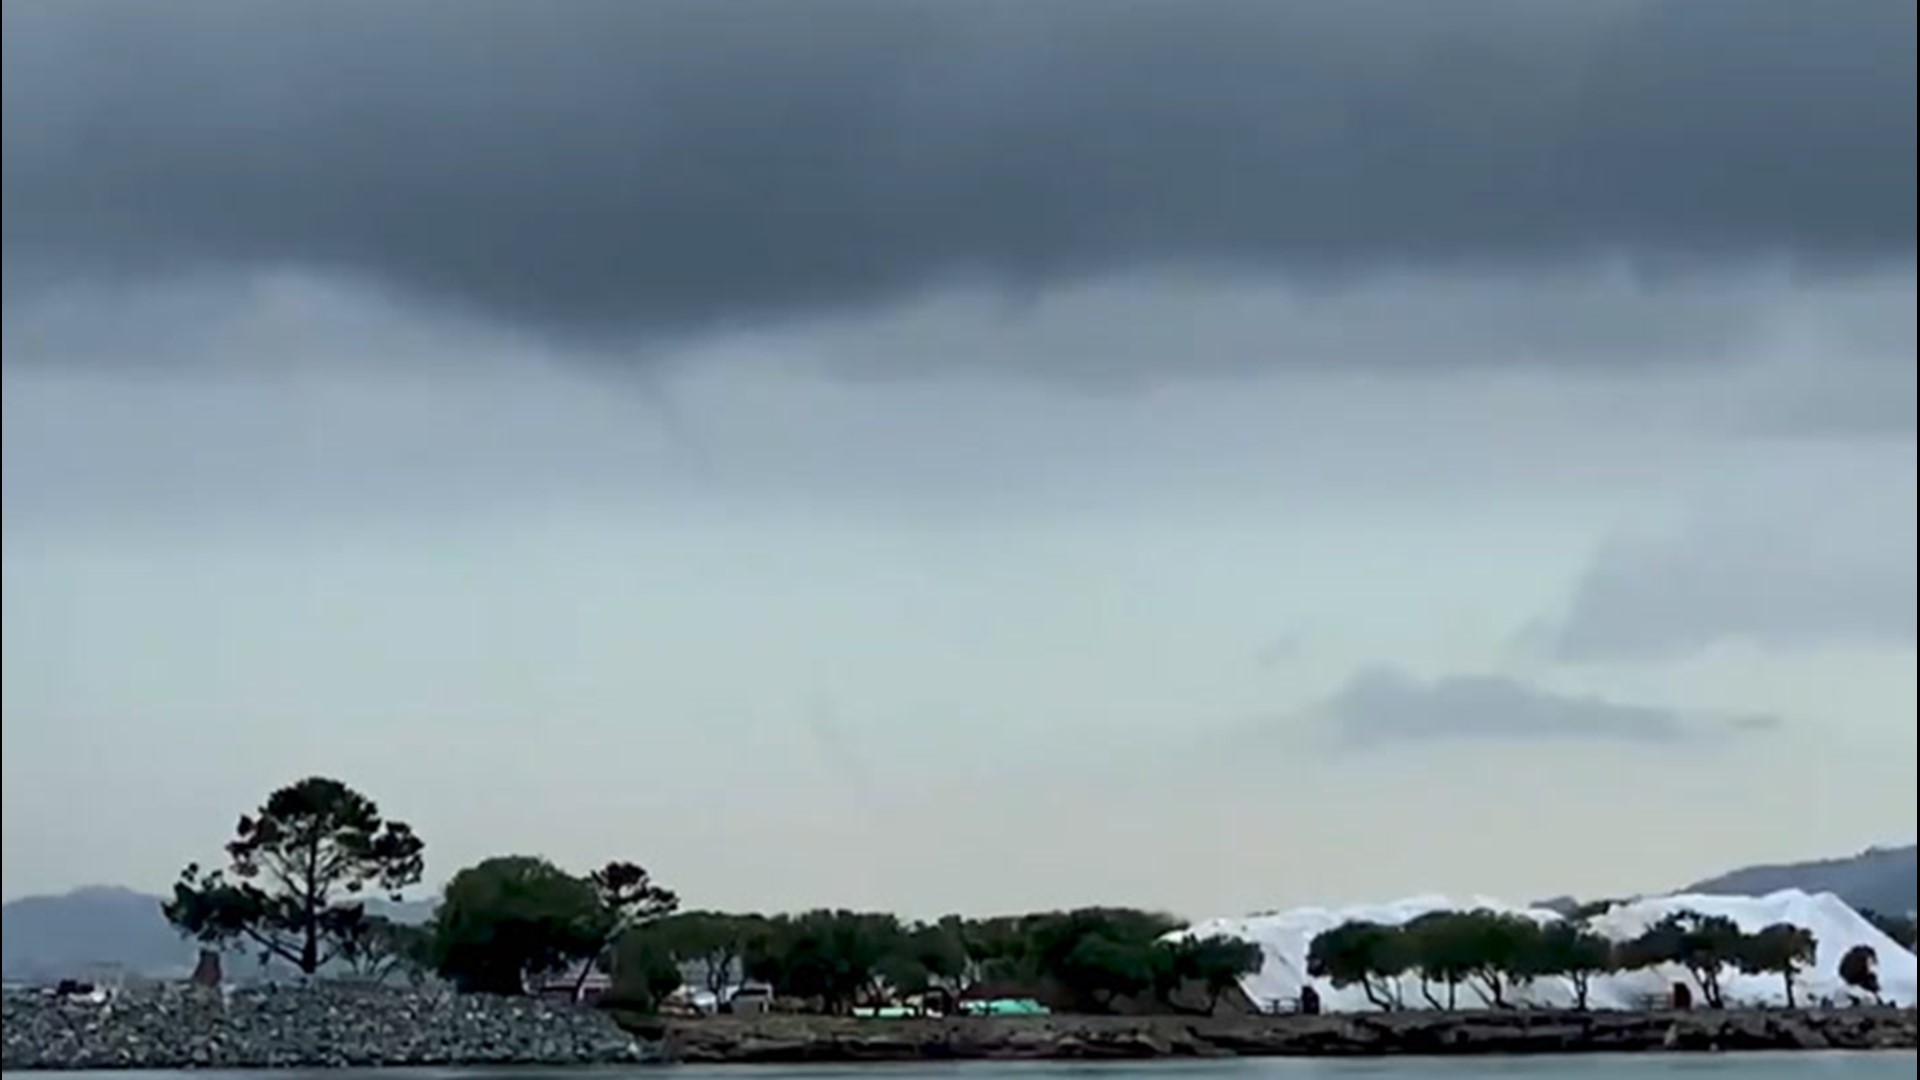 A waterspout was spotted north of Coyote Point Park in California on Monday, April 6.